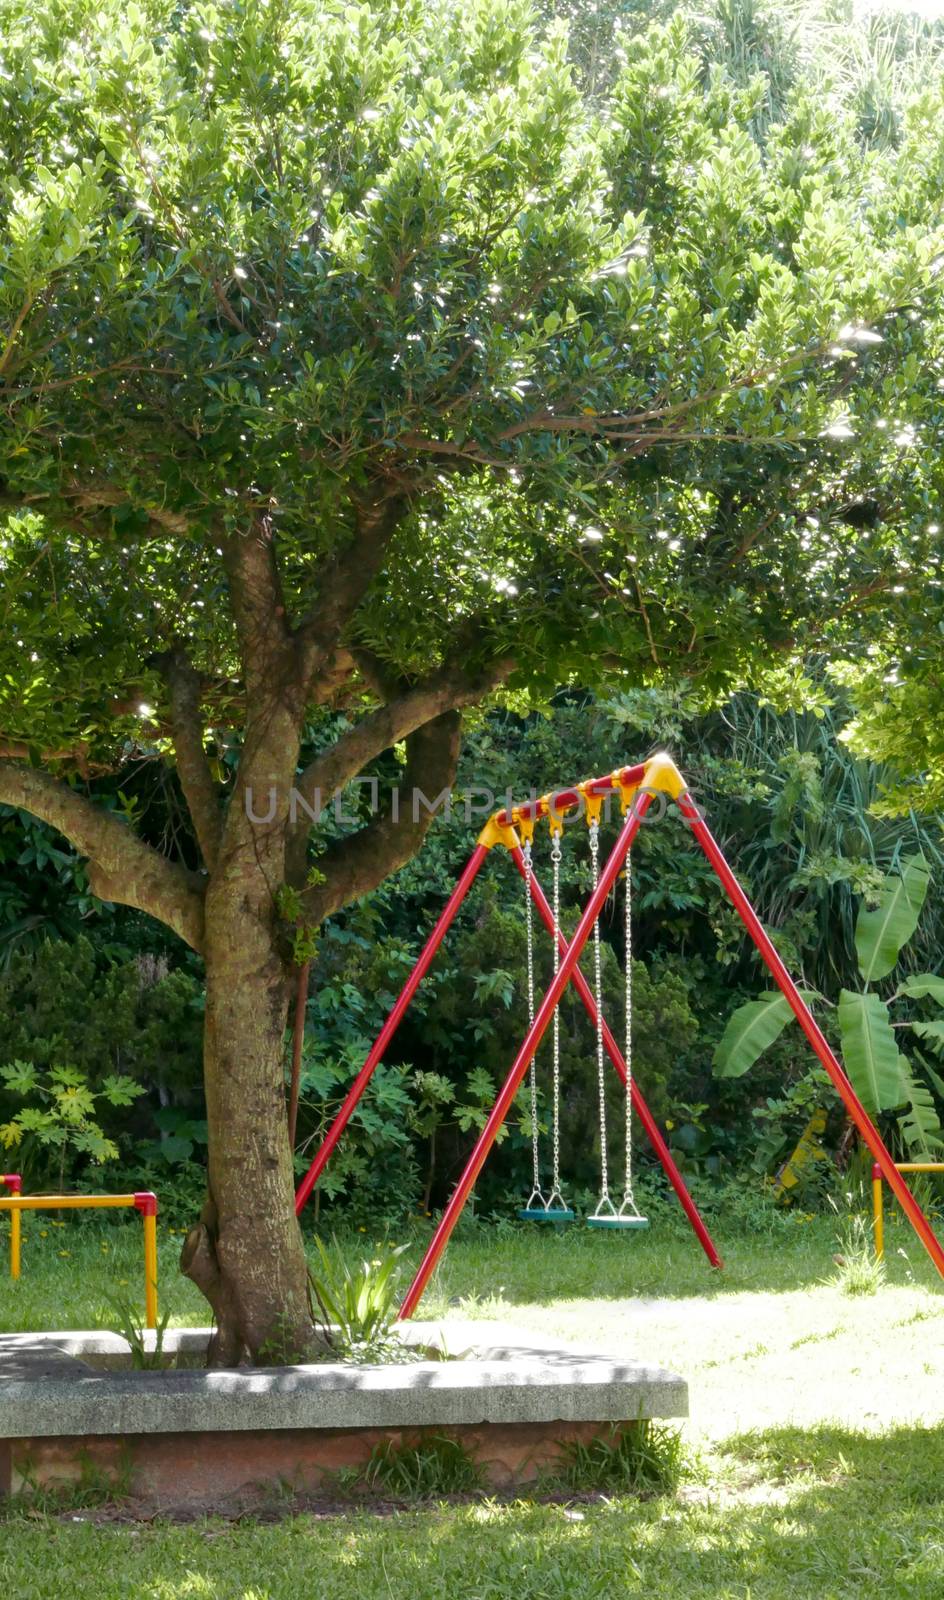 Colourful park swing on the grass by cougarsan